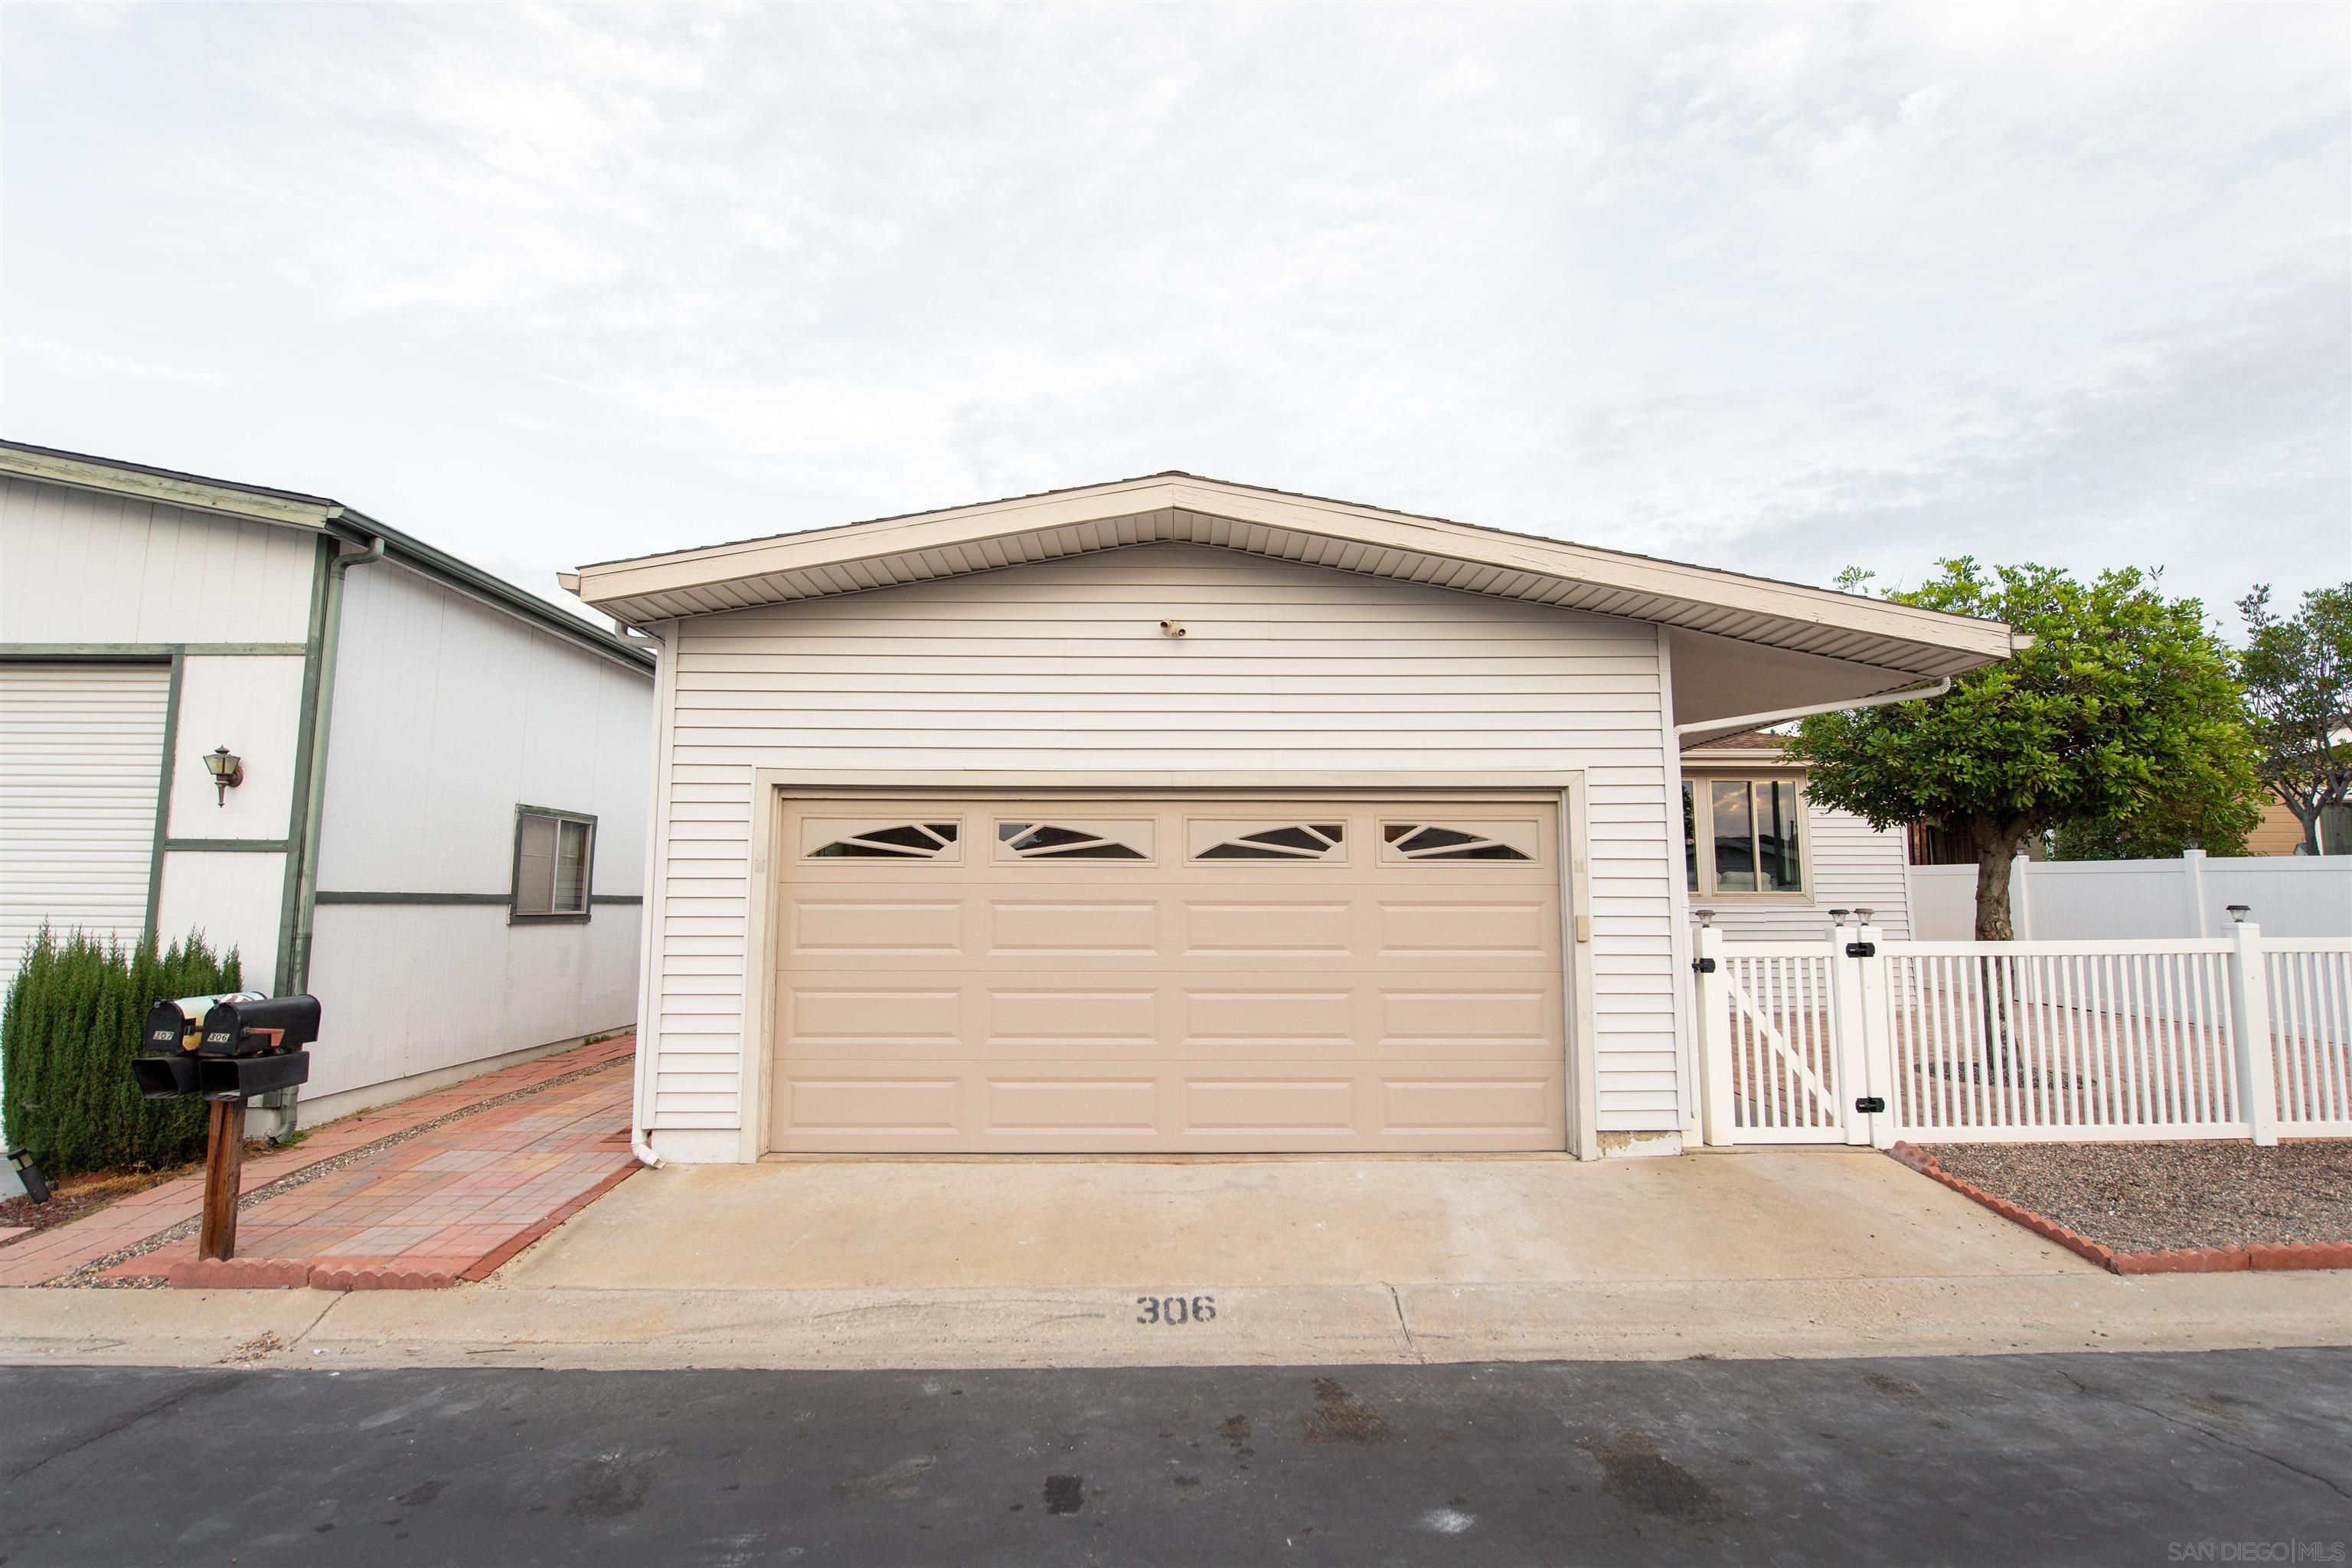 Main Photo: SANTEE Manufactured Home for sale : 2 bedrooms : 9255 N Magnolia Ave #306